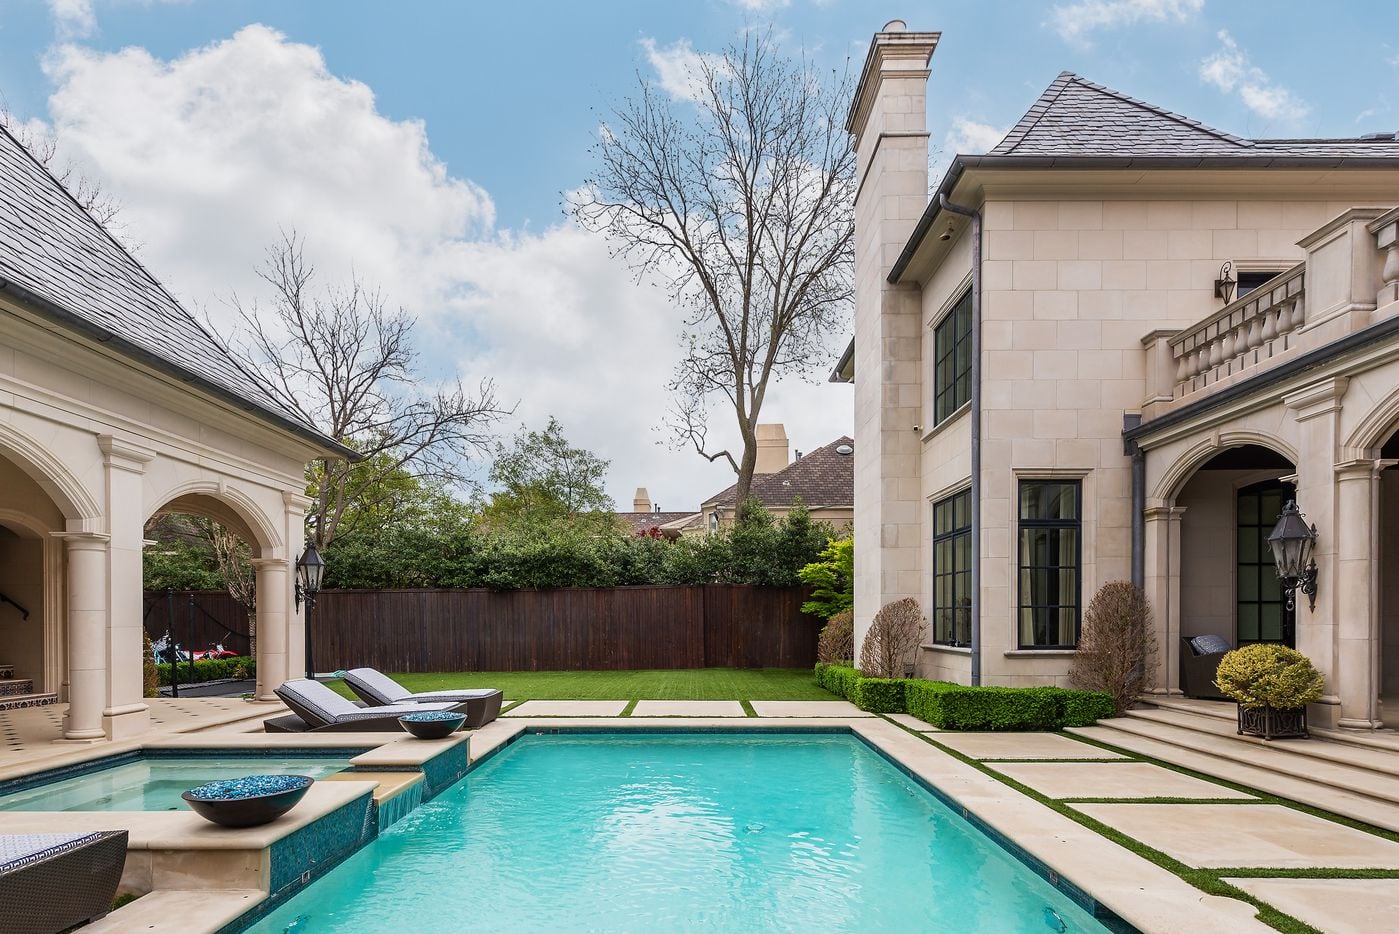 For this six-bedroom Highland Park home, the location may be as eye-catching as the size